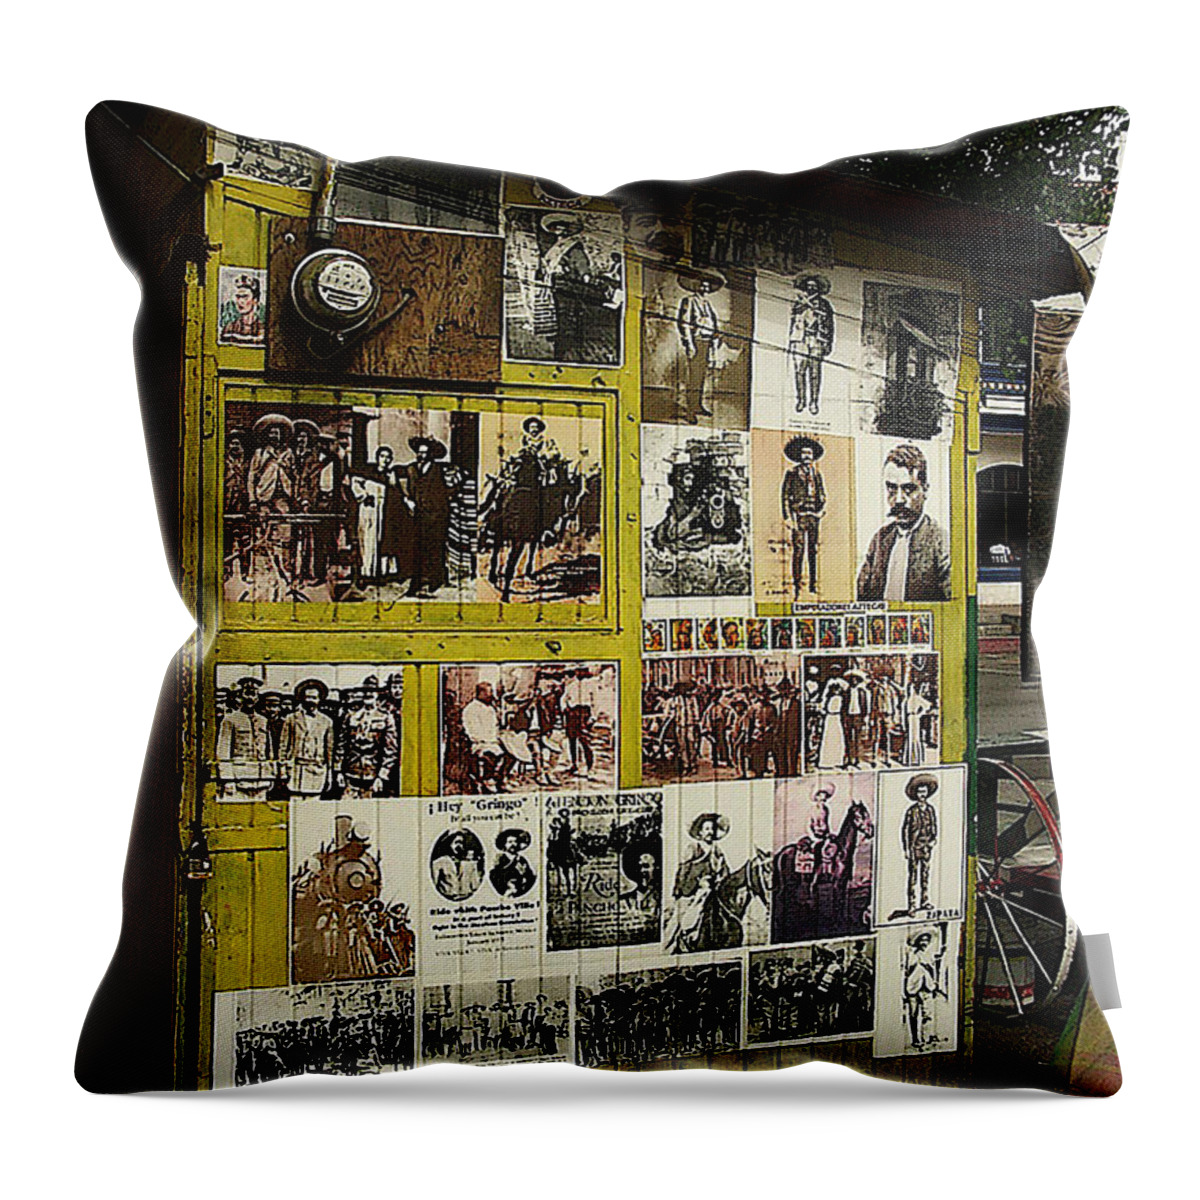 Photos Mexican Revolution Street Photographer's Shed Nogales Sonora Mexico 2003 Throw Pillow featuring the photograph Photos Mexican revolution street photographer's shed Nogales Sonora Mexico 2003 by David Lee Guss